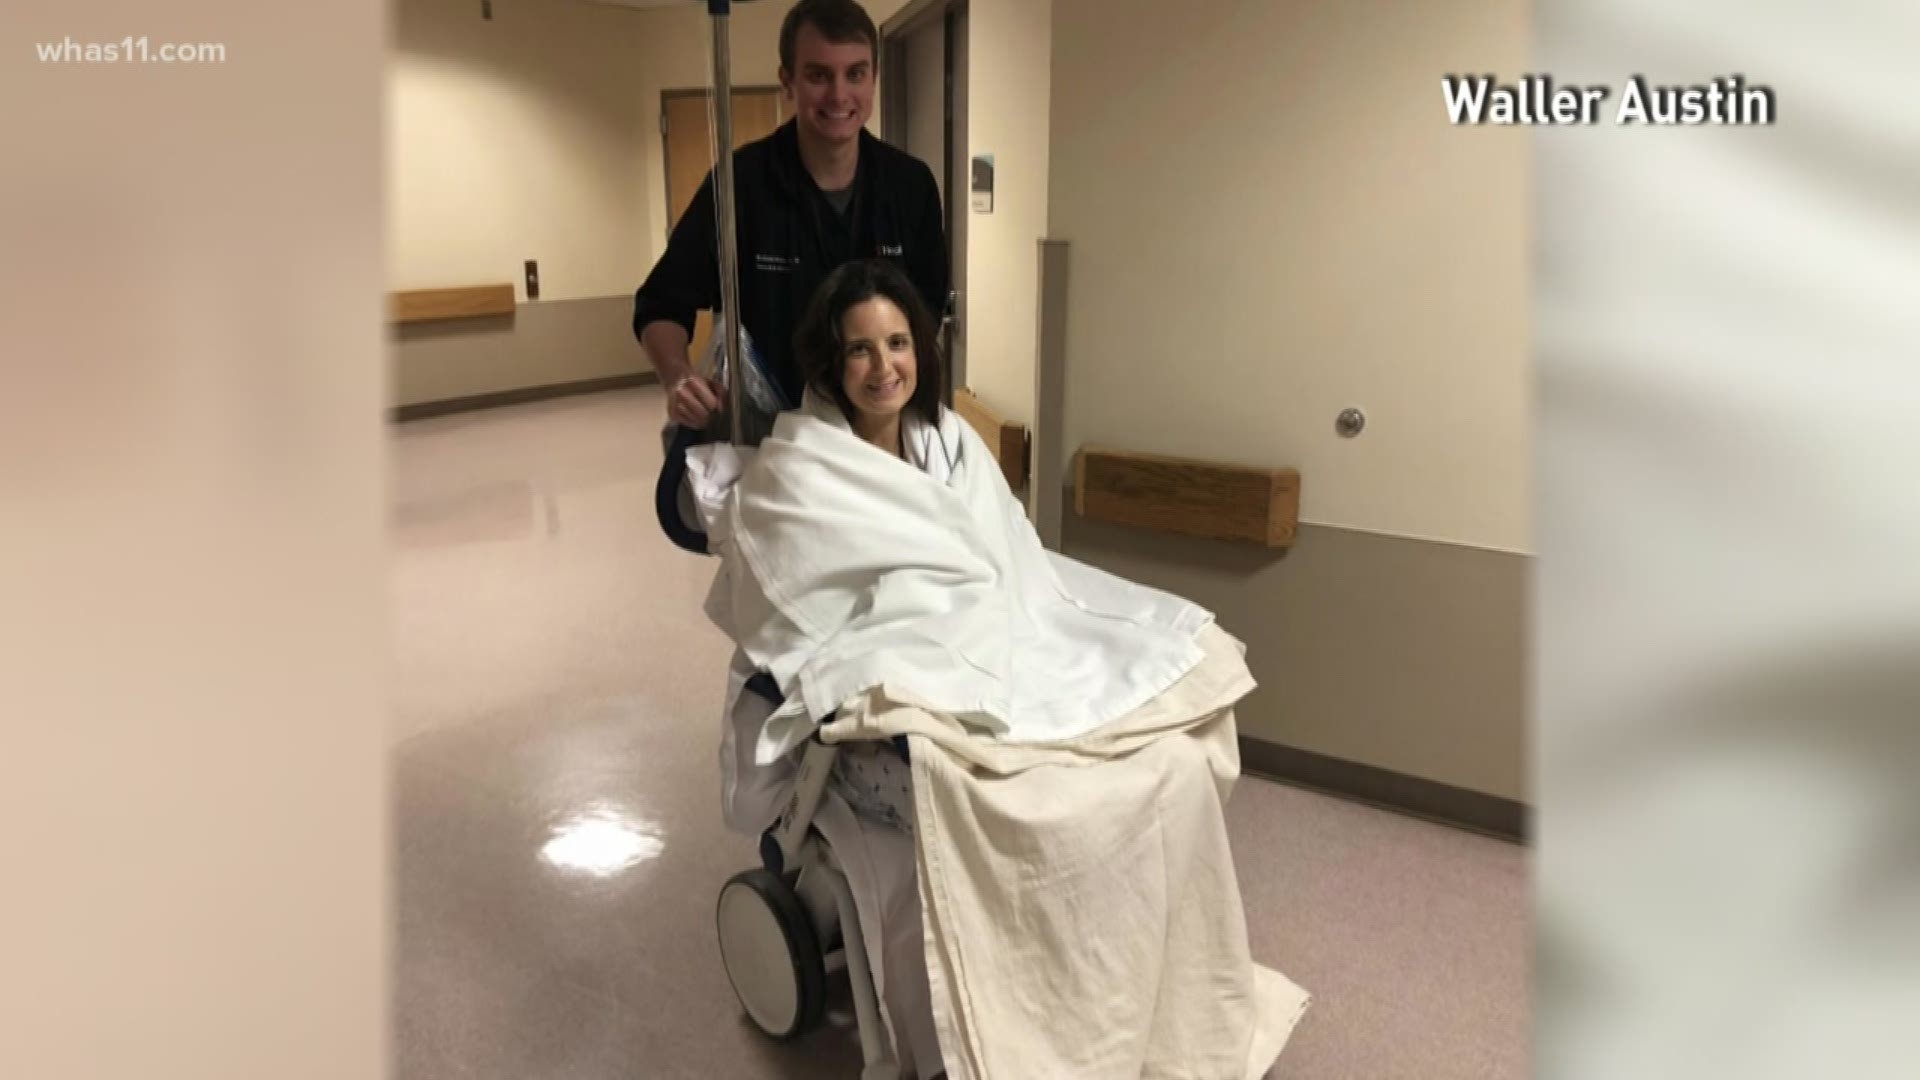 Whitney Austin - the Louisville woman shot in the Cincinnati office building this week tells us she began making peace with God when she realized she was injured.